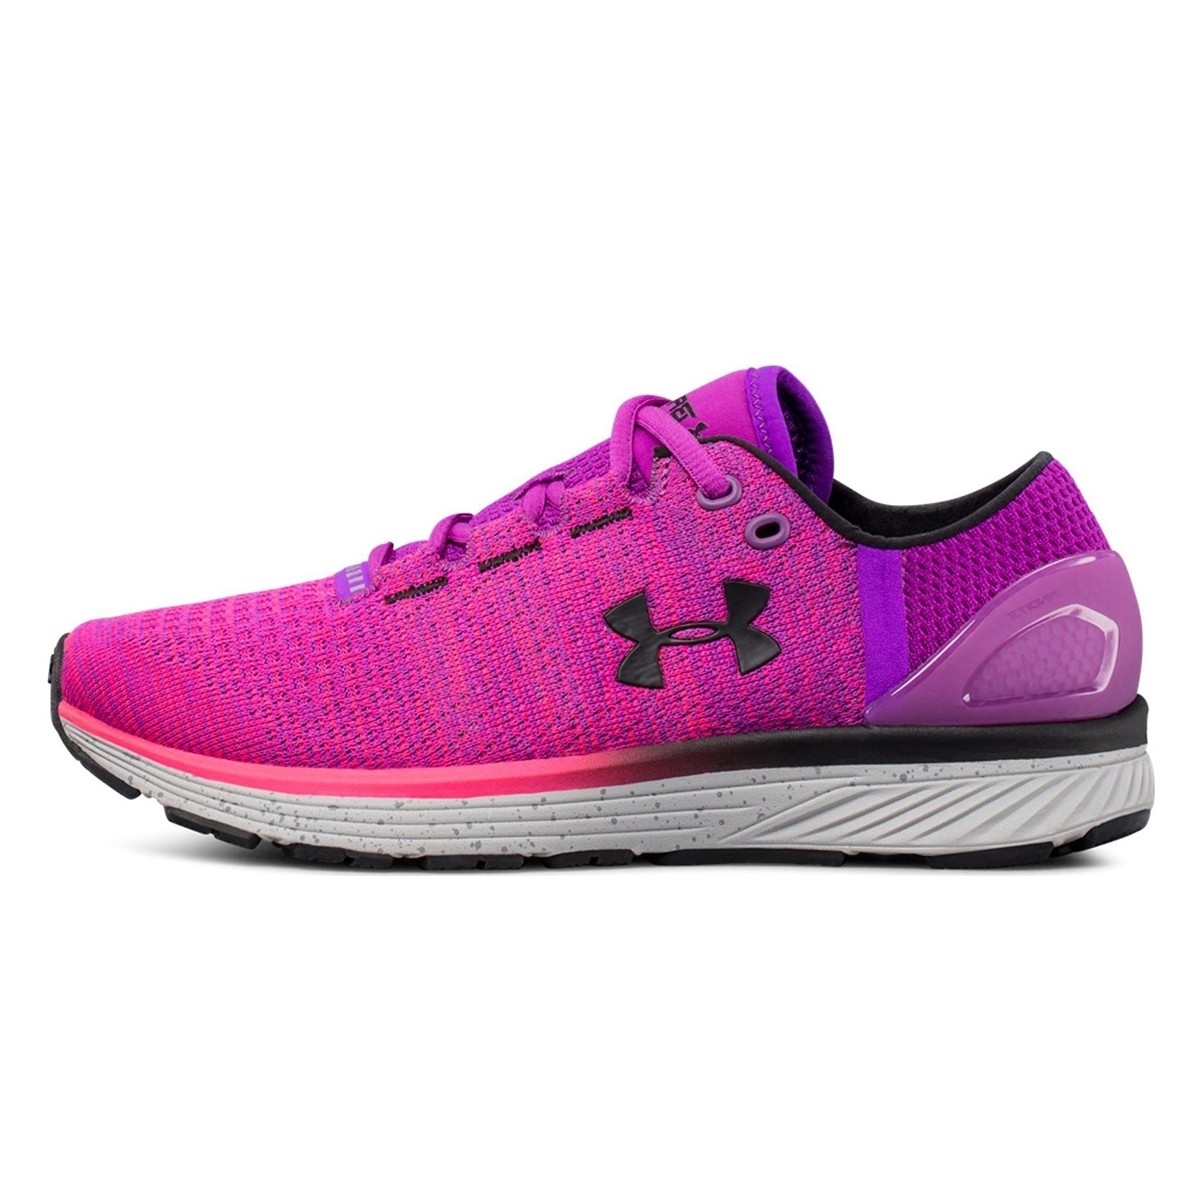 Under Armour UA Charged Bandit 3 Running Shoes 